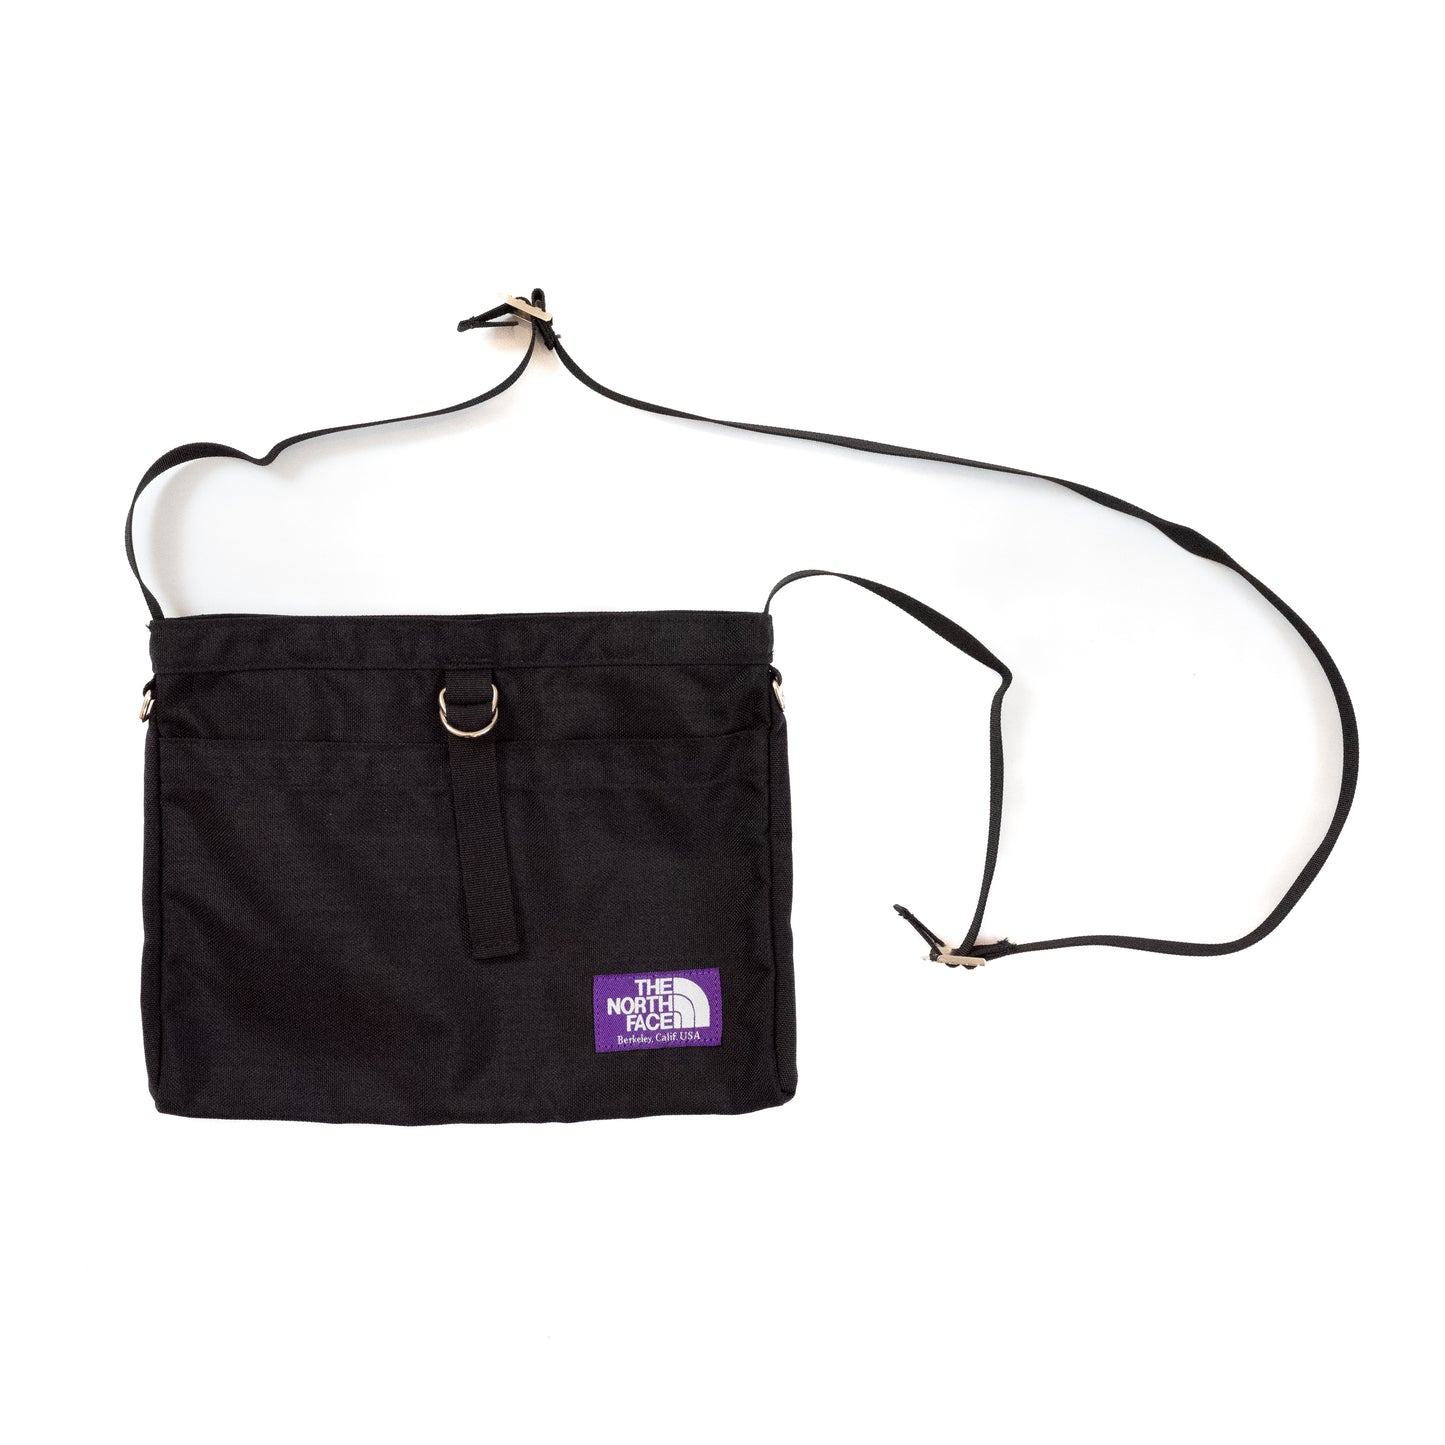 The North Face Purple Label Small Shoulder Bag